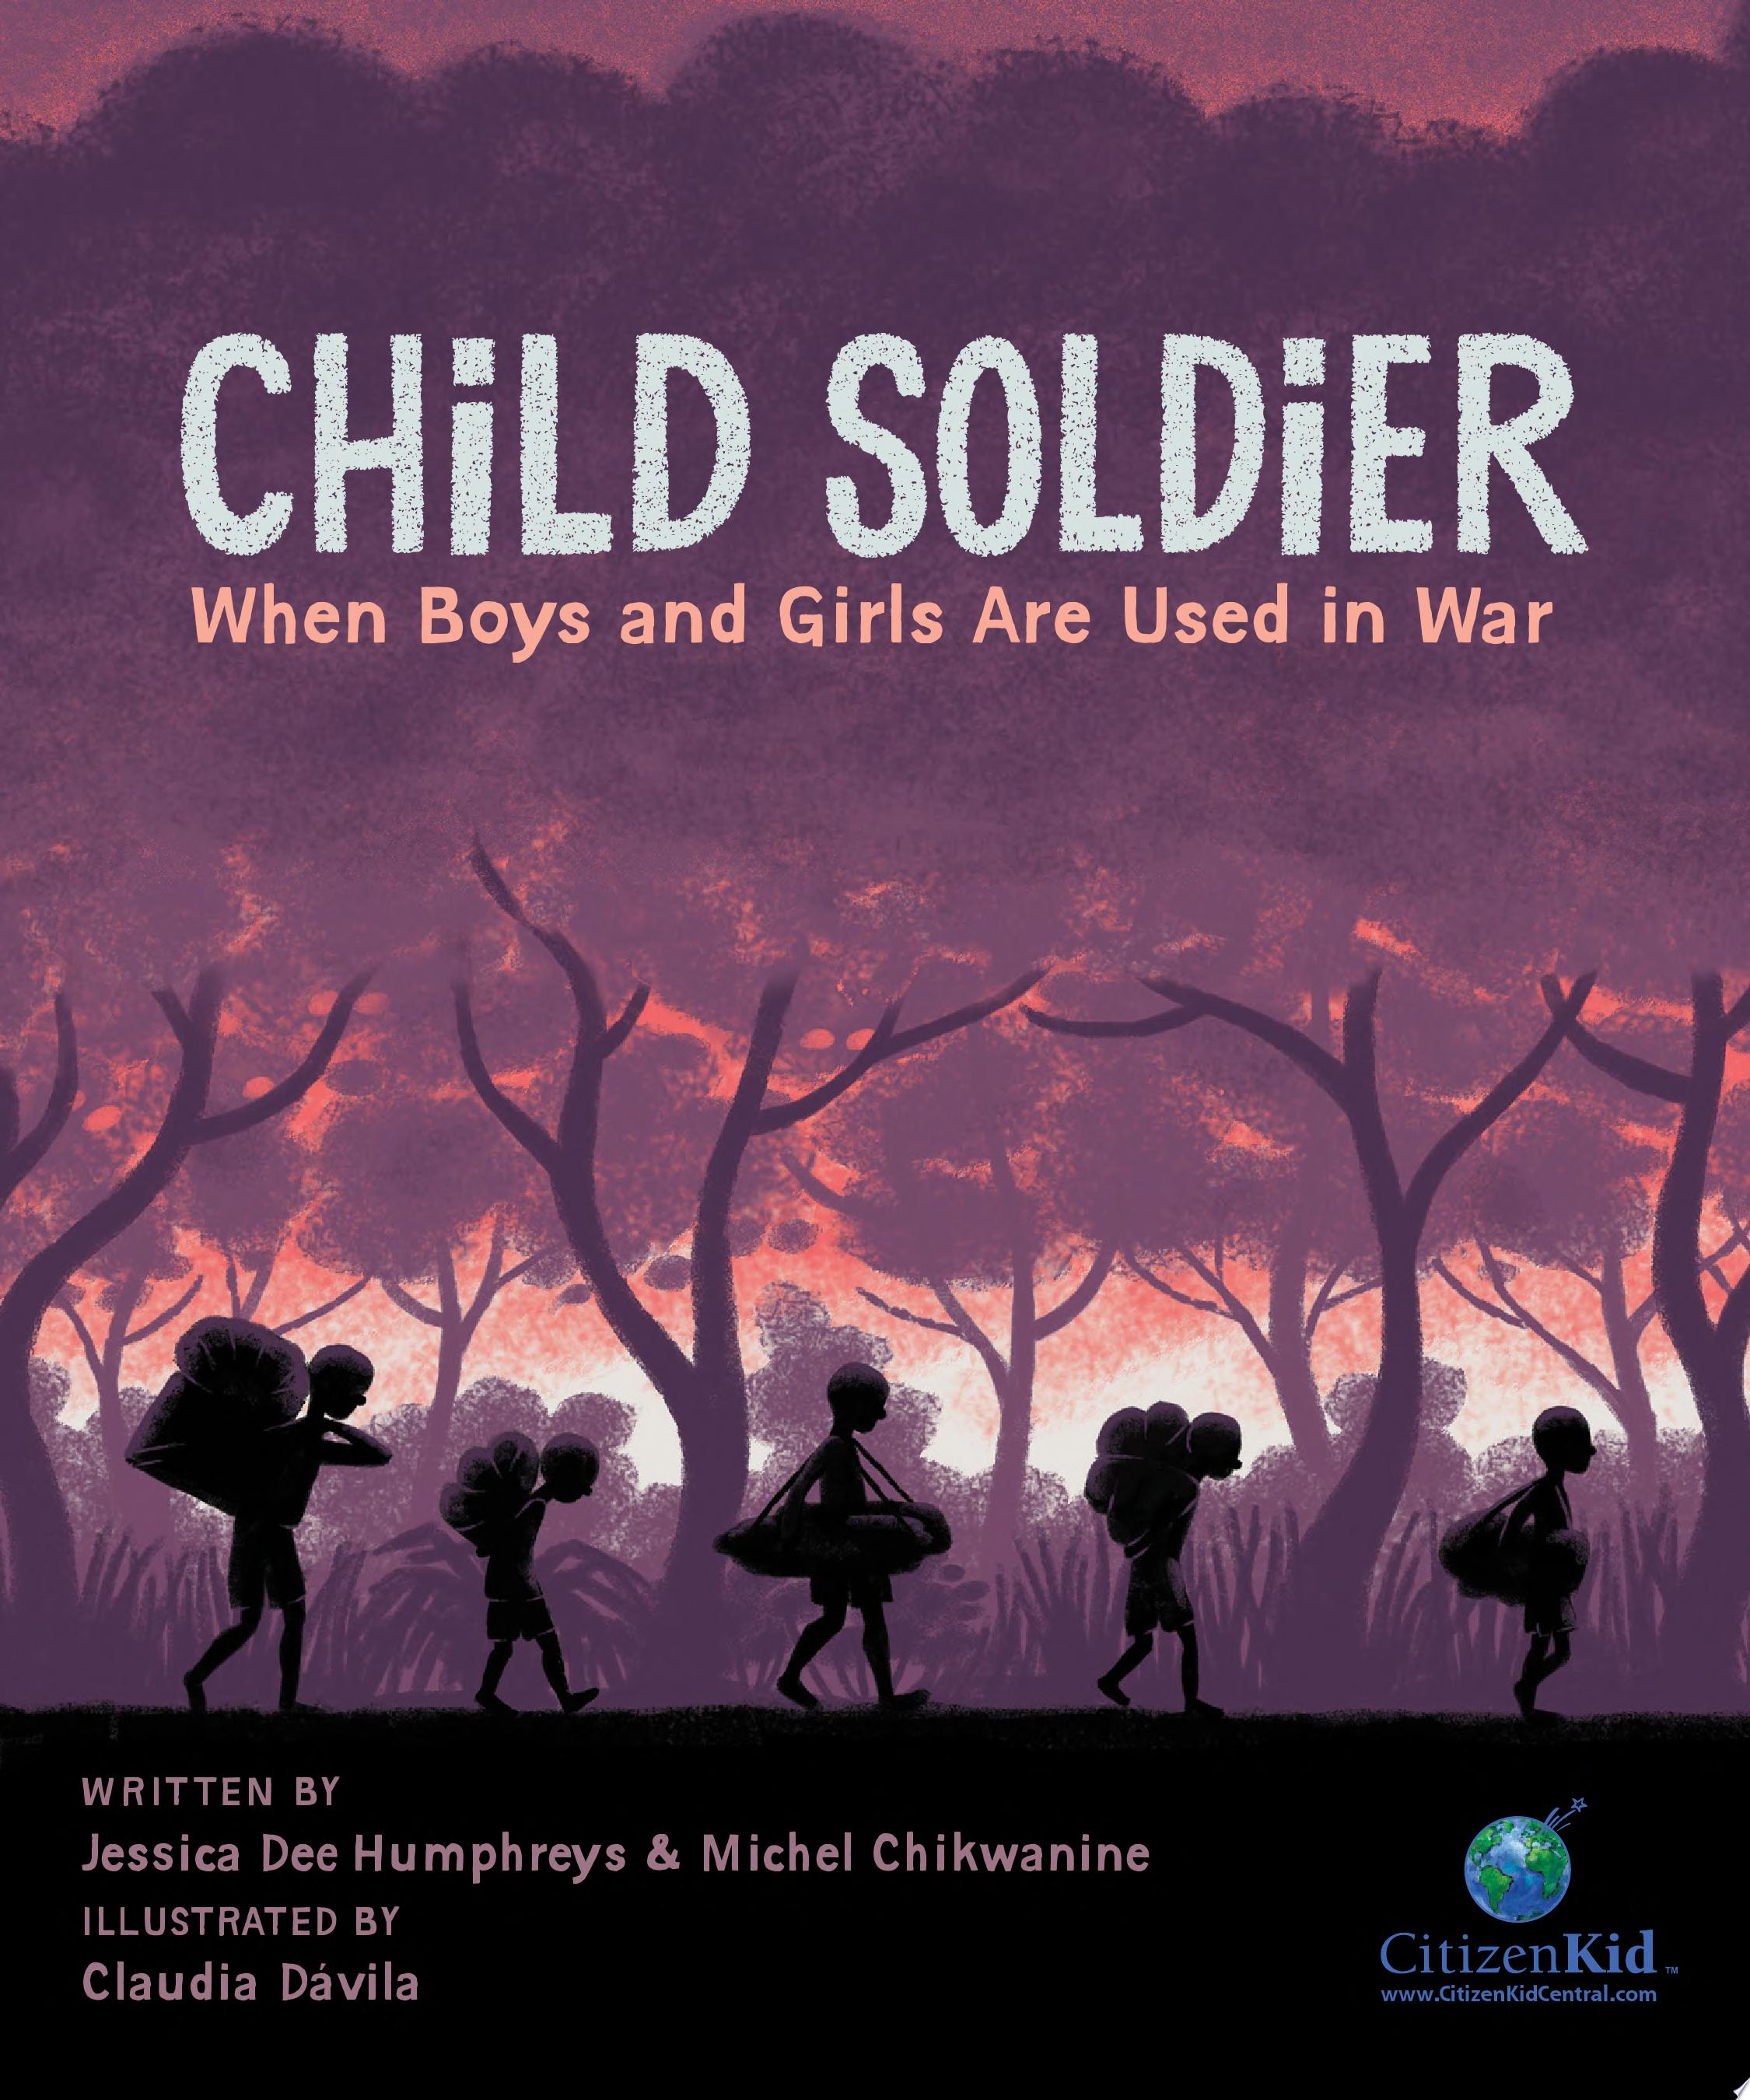 Image for "Child Soldier"